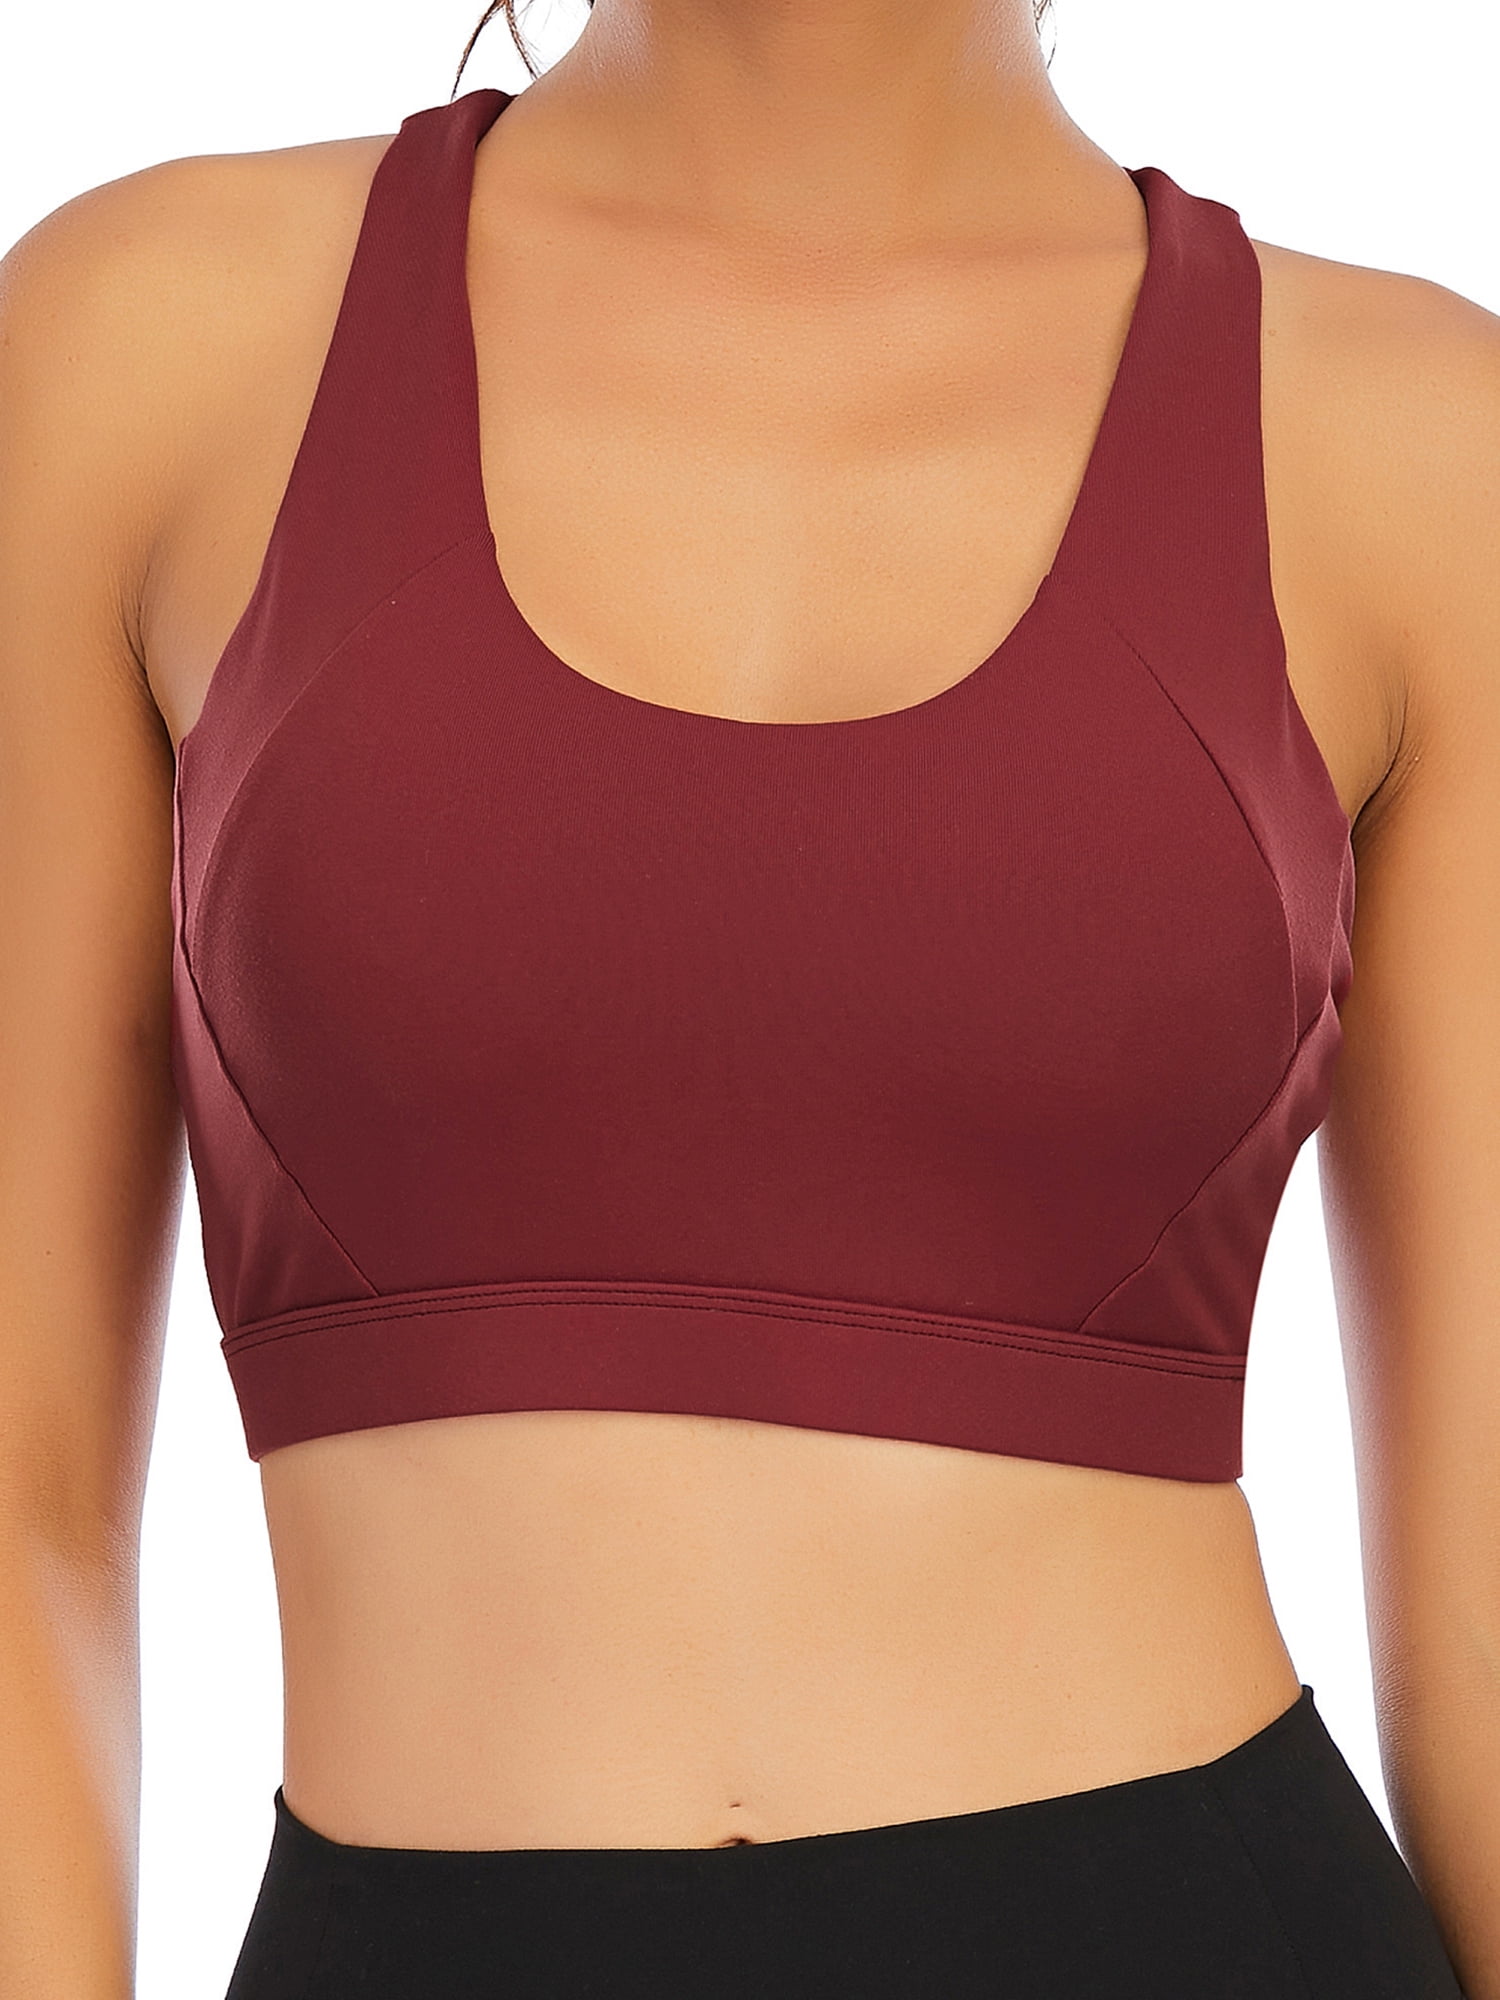 Women’s Padded Longline Sports Bra for Yoga,Gym, Workout | Sexy Sports Bra  | Women Sports Bra | Gym Crop Top's | Western Top Workout Tops | Gym